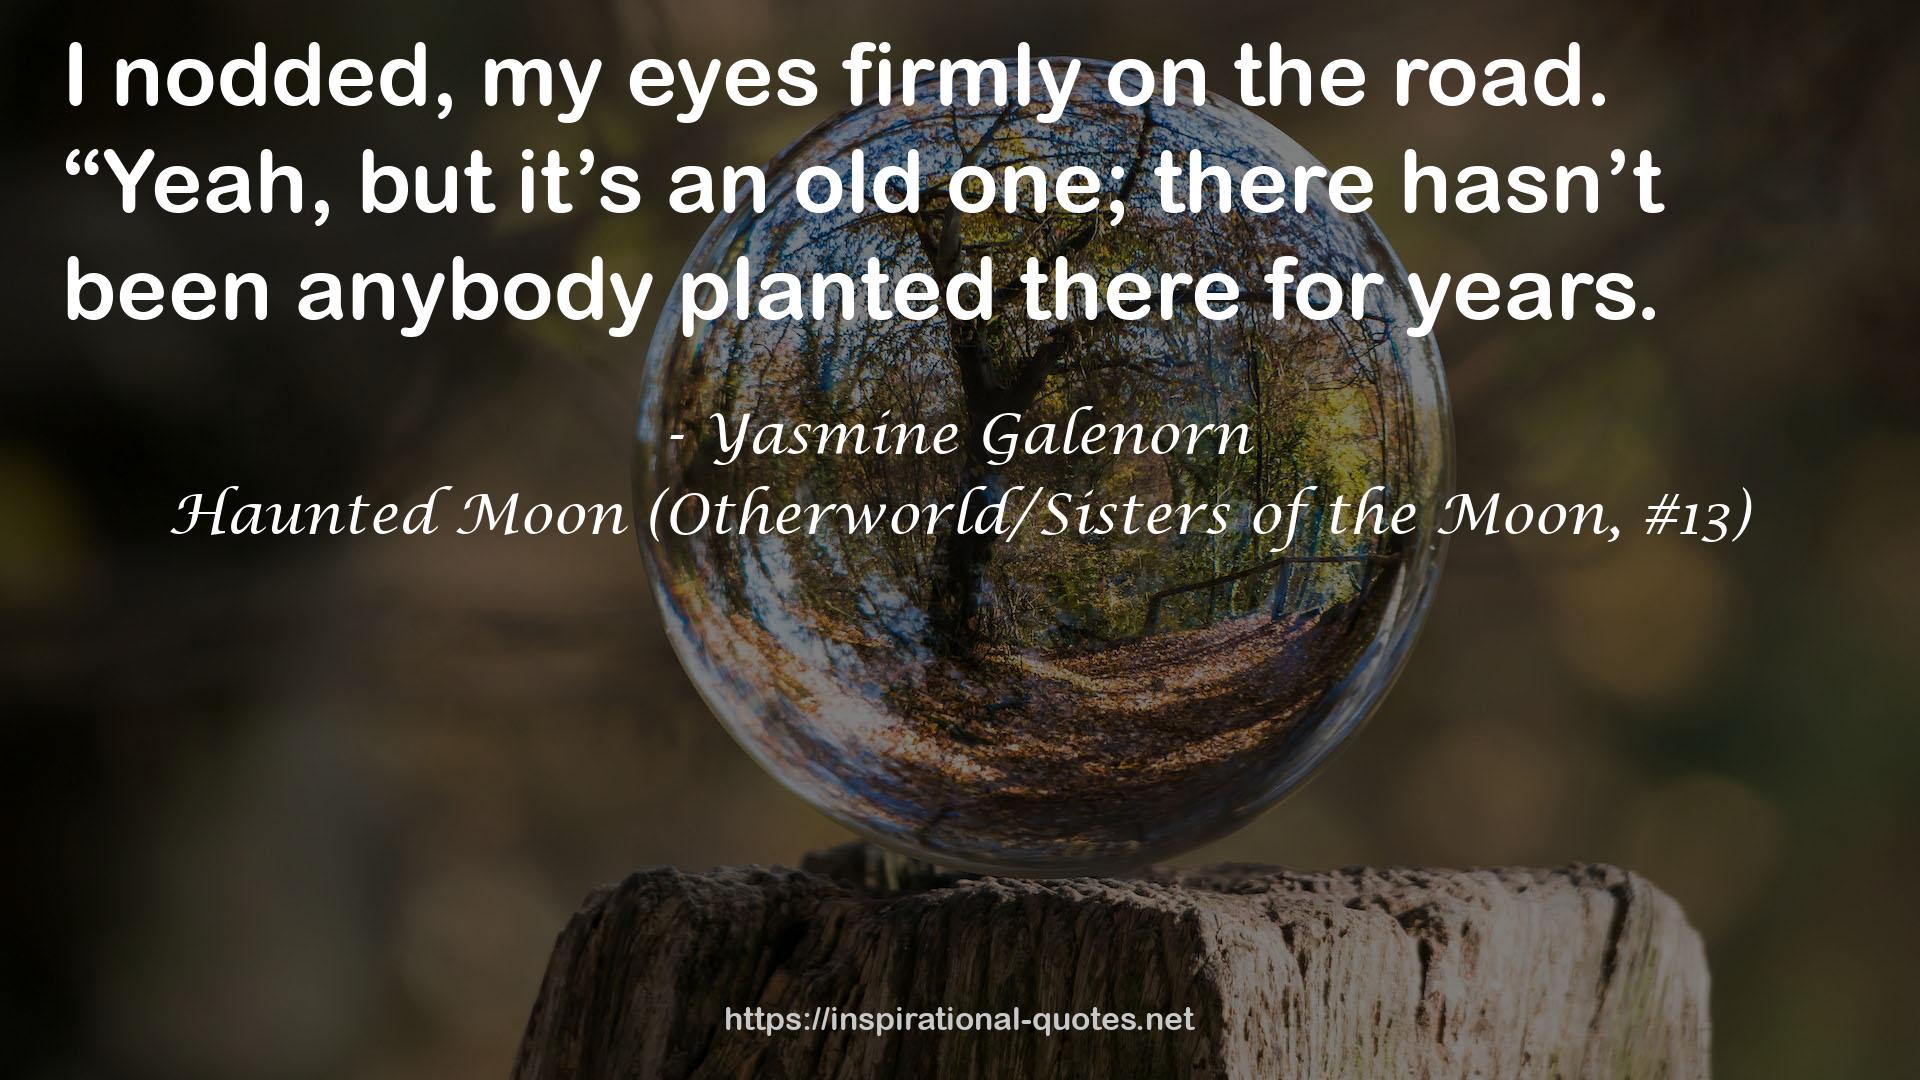 Haunted Moon (Otherworld/Sisters of the Moon, #13) QUOTES